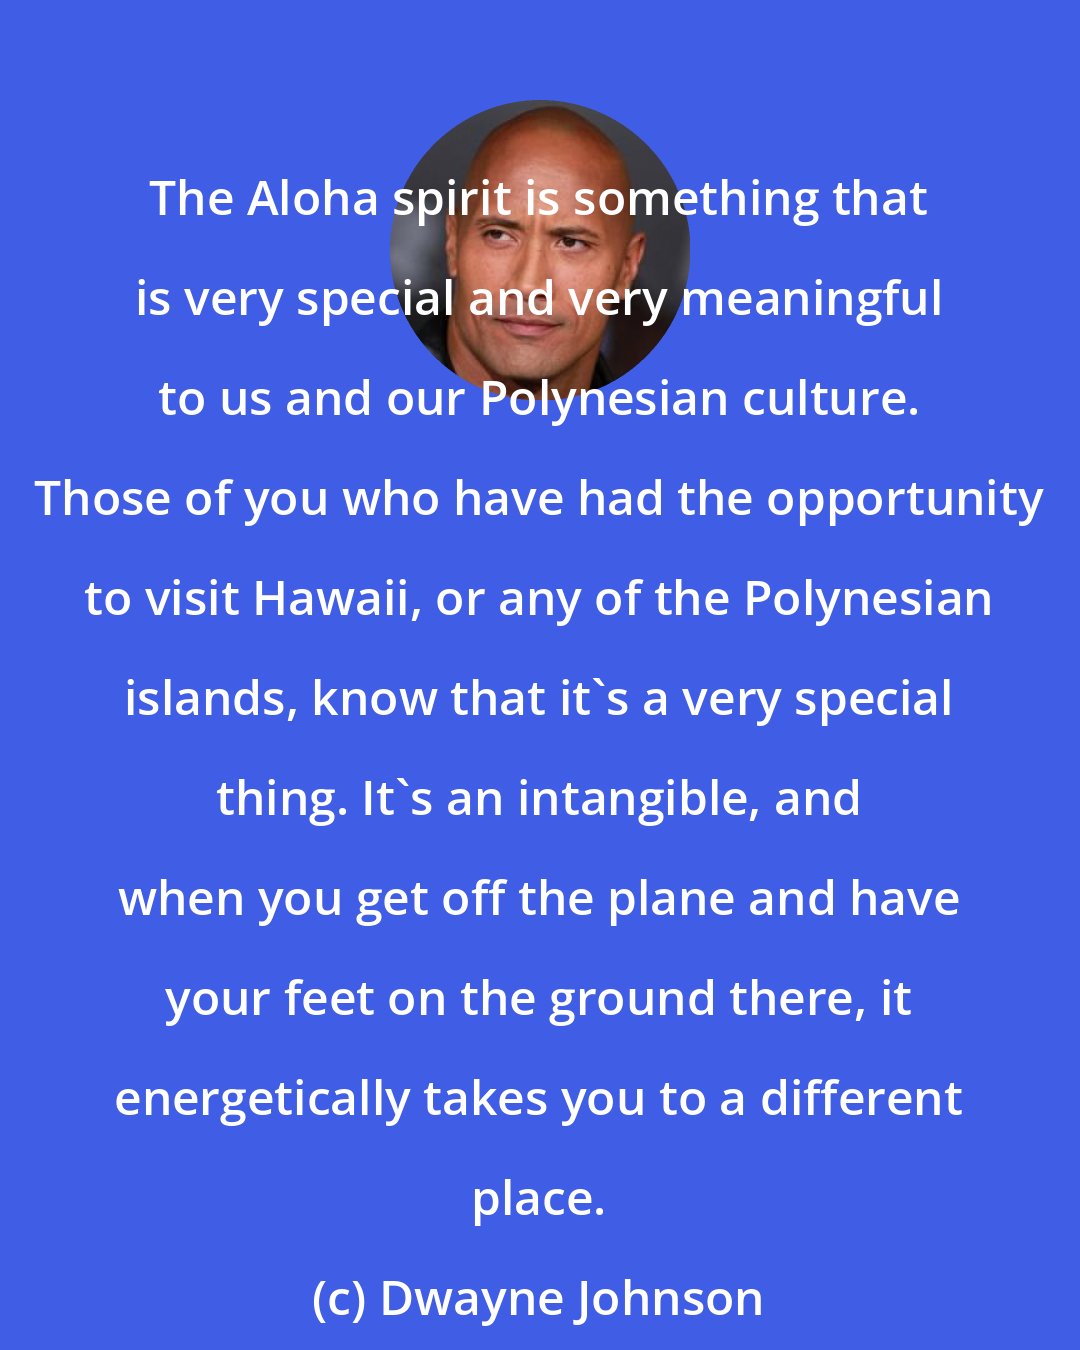 Dwayne Johnson: The Aloha spirit is something that is very special and very meaningful to us and our Polynesian culture. Those of you who have had the opportunity to visit Hawaii, or any of the Polynesian islands, know that it's a very special thing. It's an intangible, and when you get off the plane and have your feet on the ground there, it energetically takes you to a different place.